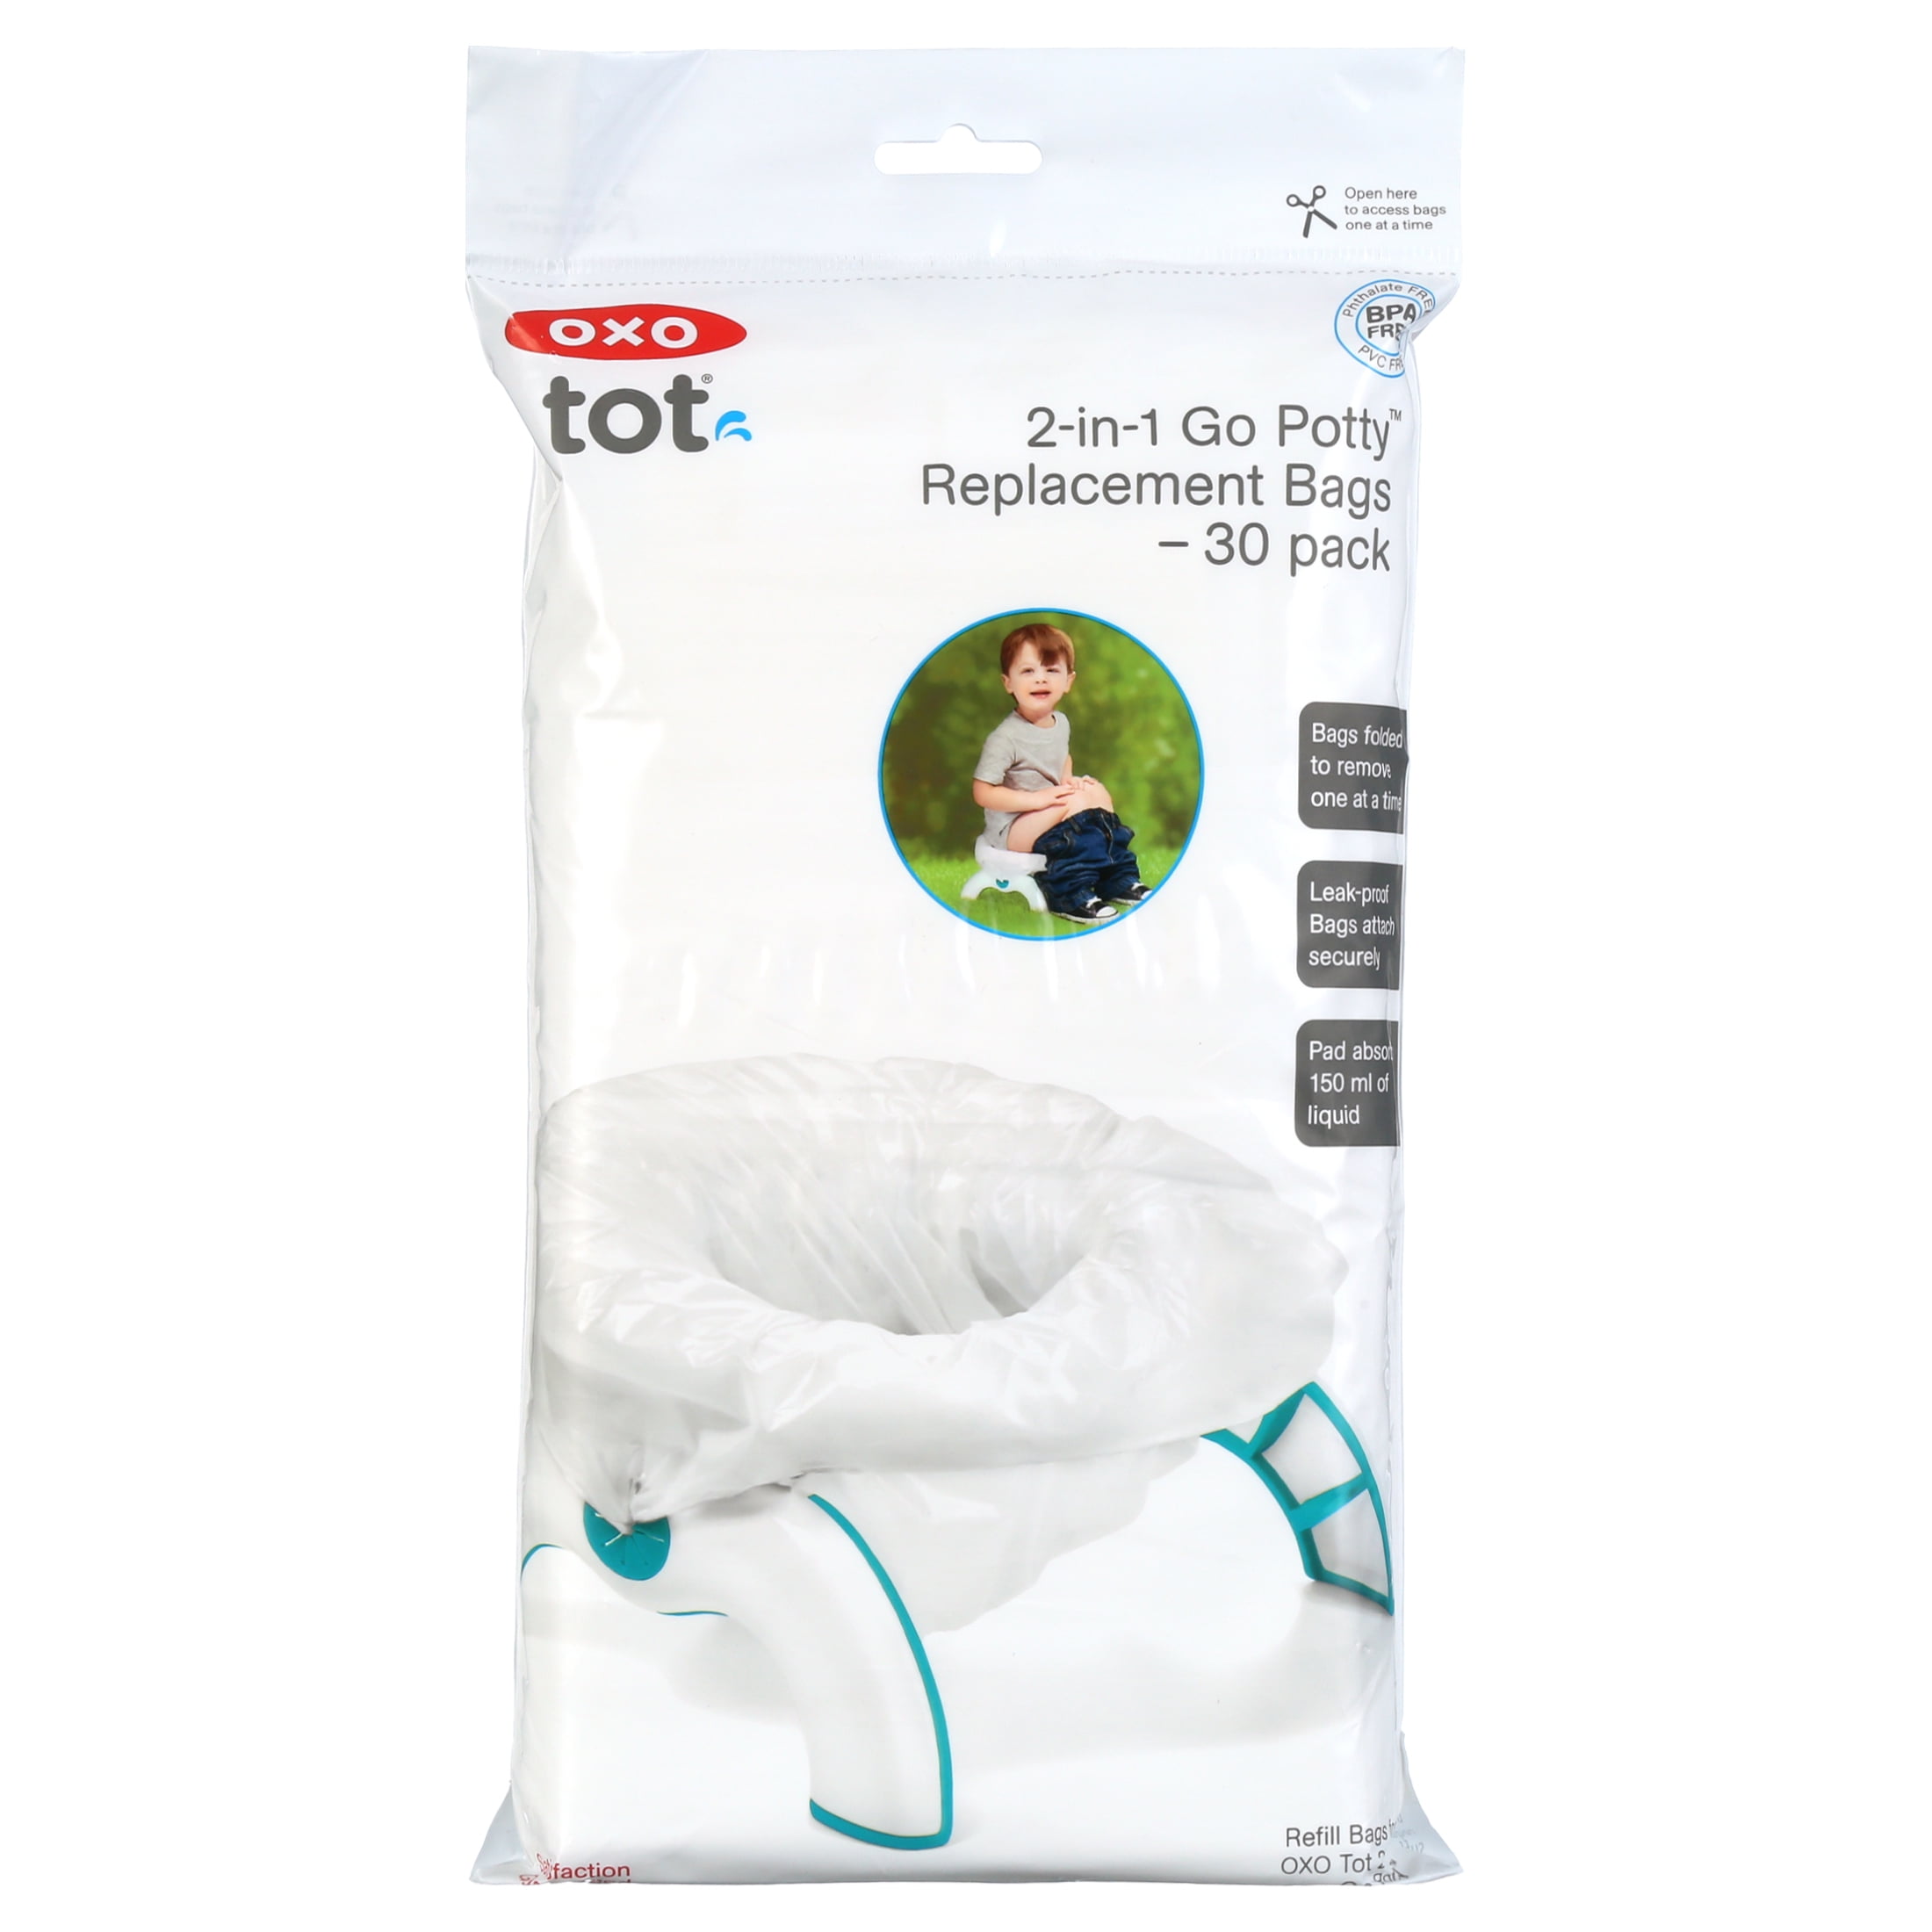 OXO Tot 2-in-1 Go Potty Refill Bags 30 pack